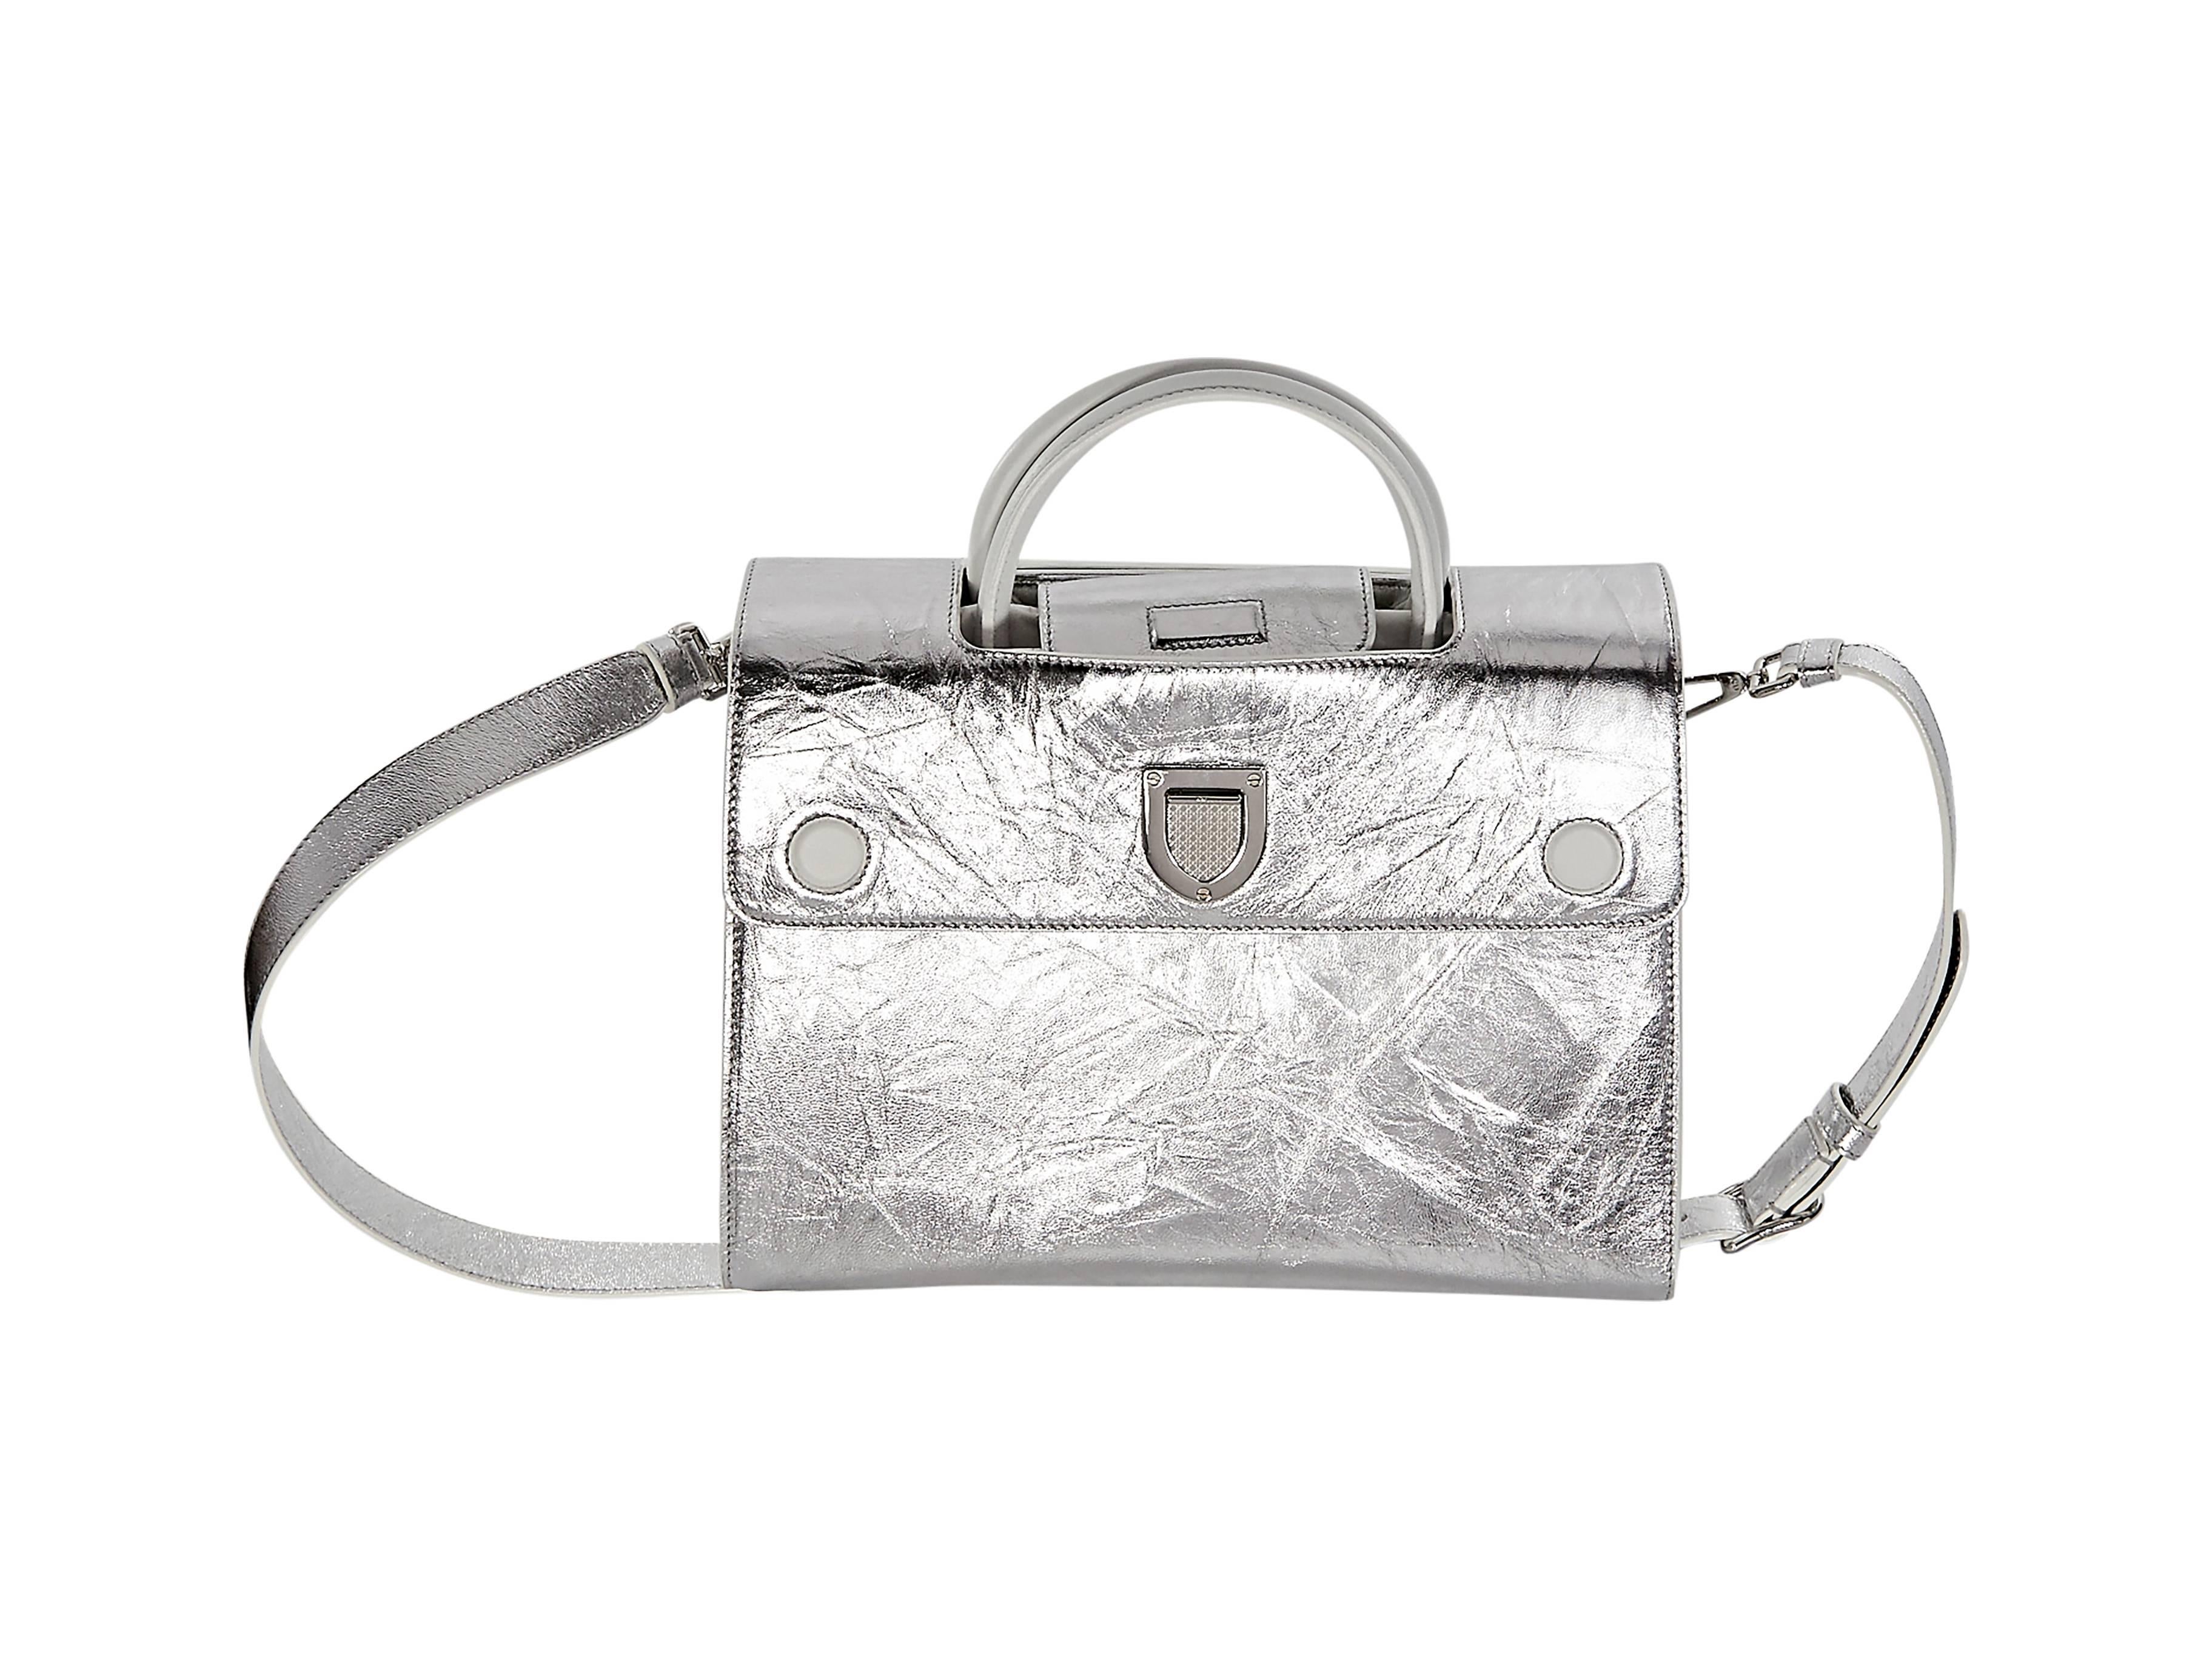 Medium Silver leather Diorever satchel by Christian Dior.  Top handle.  Detachable, adjustable crossbody strap.  Front flap with push-lock closure.  Inner pockets.  Protective metal feet.  Silvertone hardware. 